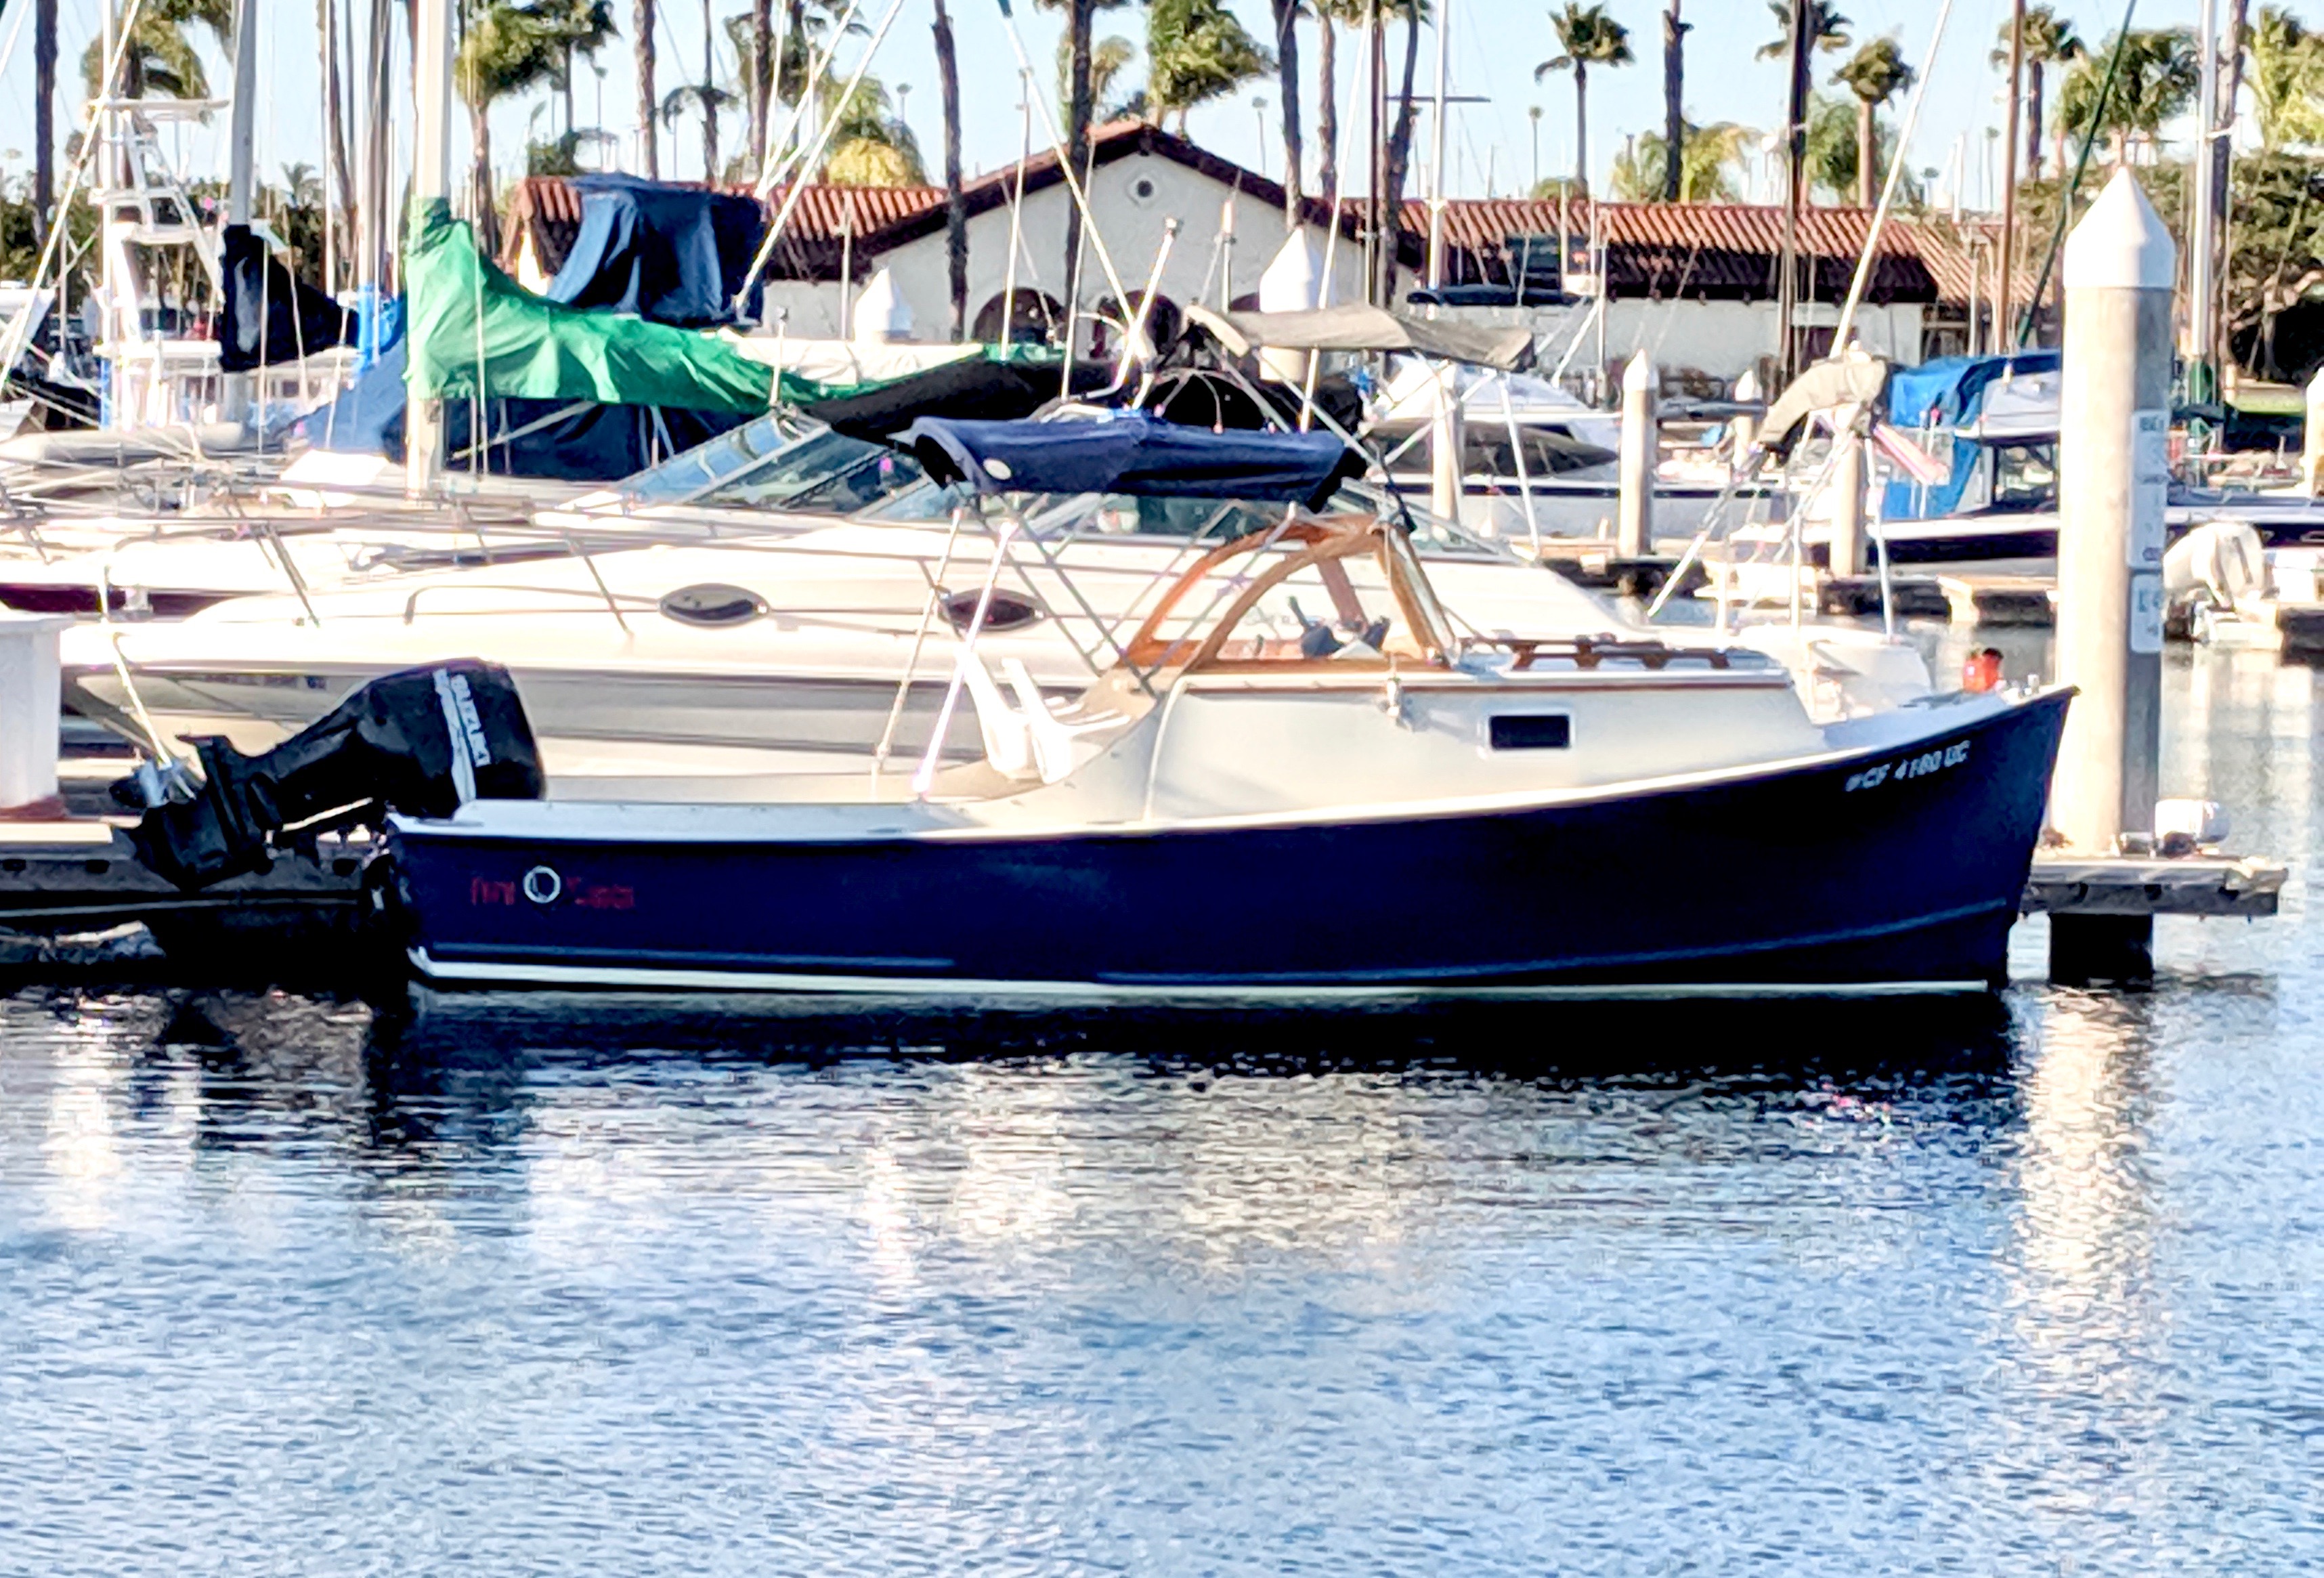 21 Seaway 2007 Five O Clock San Pedro California Sold On 2021 04 01 By Denison Yacht Sales